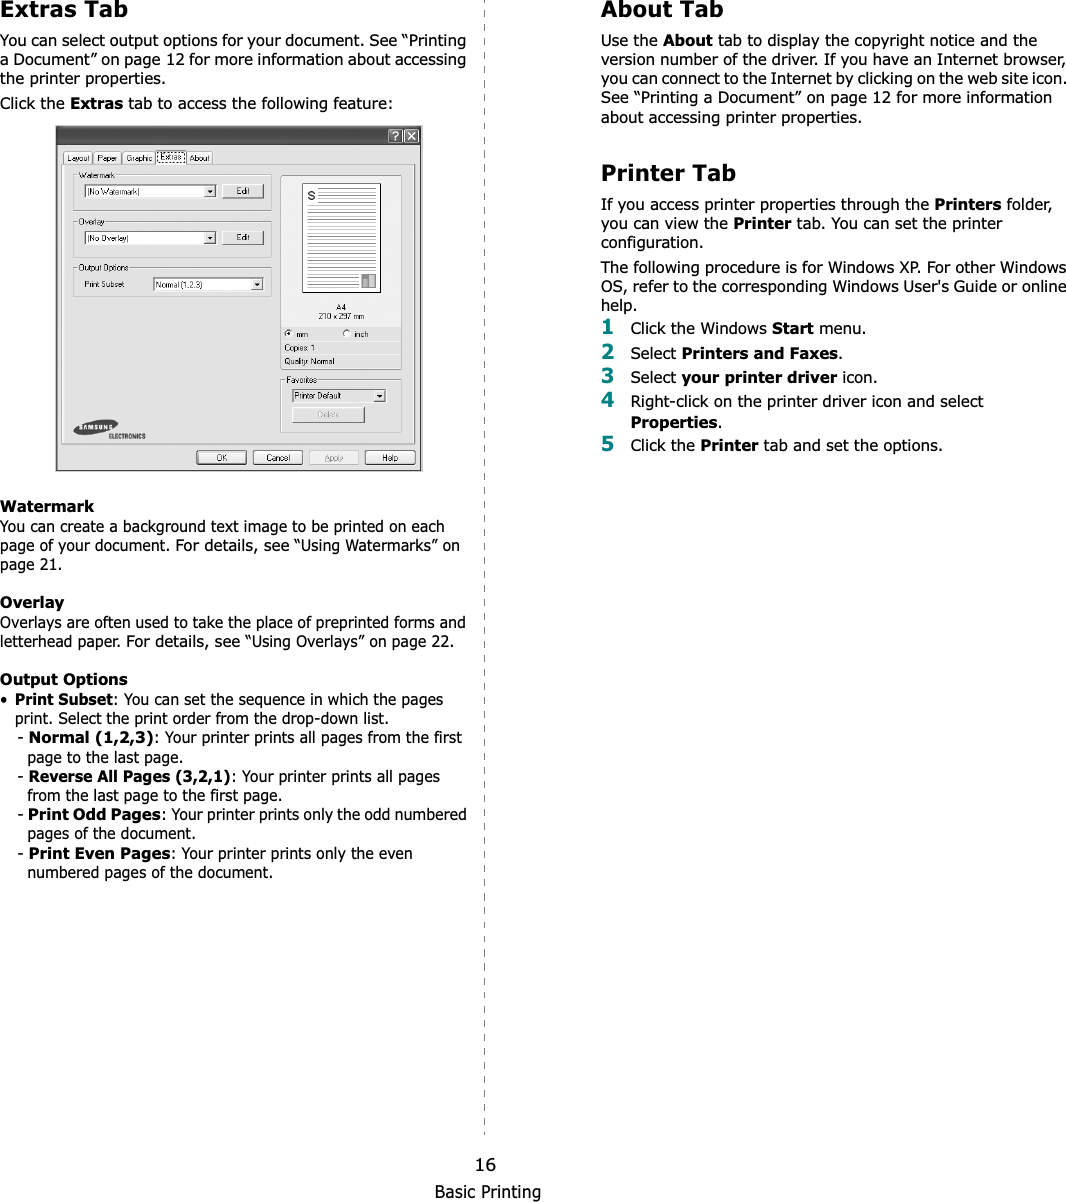 Basic Printing16Extras TabYou can select output options for your document. See “Printing a Document” on page 12 for more information about accessing the printer properties.Click the Extras tab to access the following feature:  WatermarkYou can create a background text image to be printed on each page of your document. For details, see “Using Watermarks” on page 21.OverlayOverlays are often used to take the place of preprinted forms and letterhead paper. For details, see “Using Overlays” on page 22.Output Options•Print Subset: You can set the sequence in which the pages print. Select the print order from the drop-down list.-Normal (1,2,3): Your printer prints all pages from the first page to the last page.-Reverse All Pages (3,2,1): Your printer prints all pages from the last page to the first page.-Print Odd Pages: Your printer prints only the odd numbered pages of the document.-Print Even Pages: Your printer prints only the even numbered pages of the document.About TabUse the About tab to display the copyright notice and the version number of the driver. If you have an Internet browser, you can connect to the Internet by clicking on the web site icon. See “Printing a Document” on page 12 for more information about accessing printer properties.Printer TabIf you access printer properties through the Printers folder, you can view the Printer tab. You can set the printer configuration.The following procedure is for Windows XP. For other Windows OS, refer to the corresponding Windows User&apos;s Guide or online help.1Click the Windows Start menu. 2Select Printers and Faxes.3Select your printer driver icon. 4Right-click on the printer driver icon and select Properties.5Click the Printer tab and set the options.  